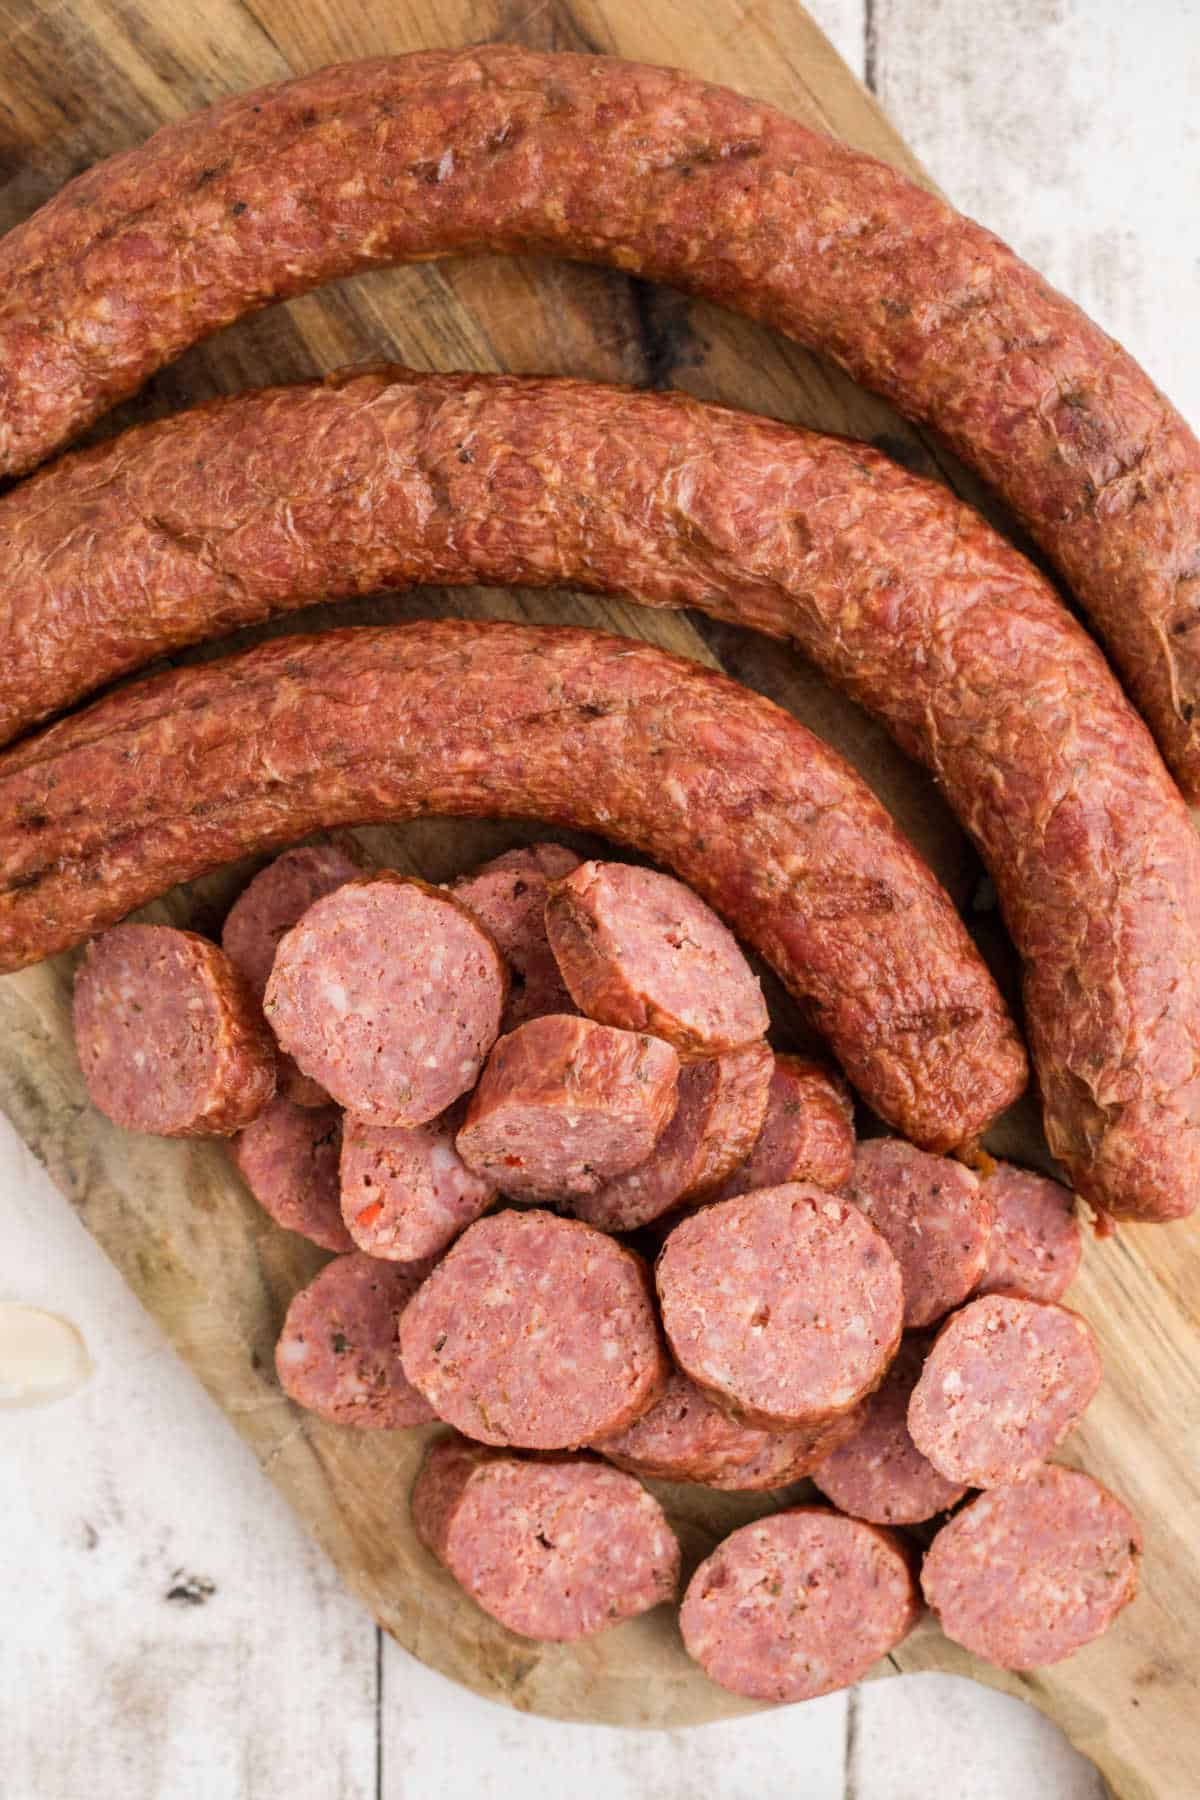 Overhead shot of some andouille sausage, with some sliced into coins.